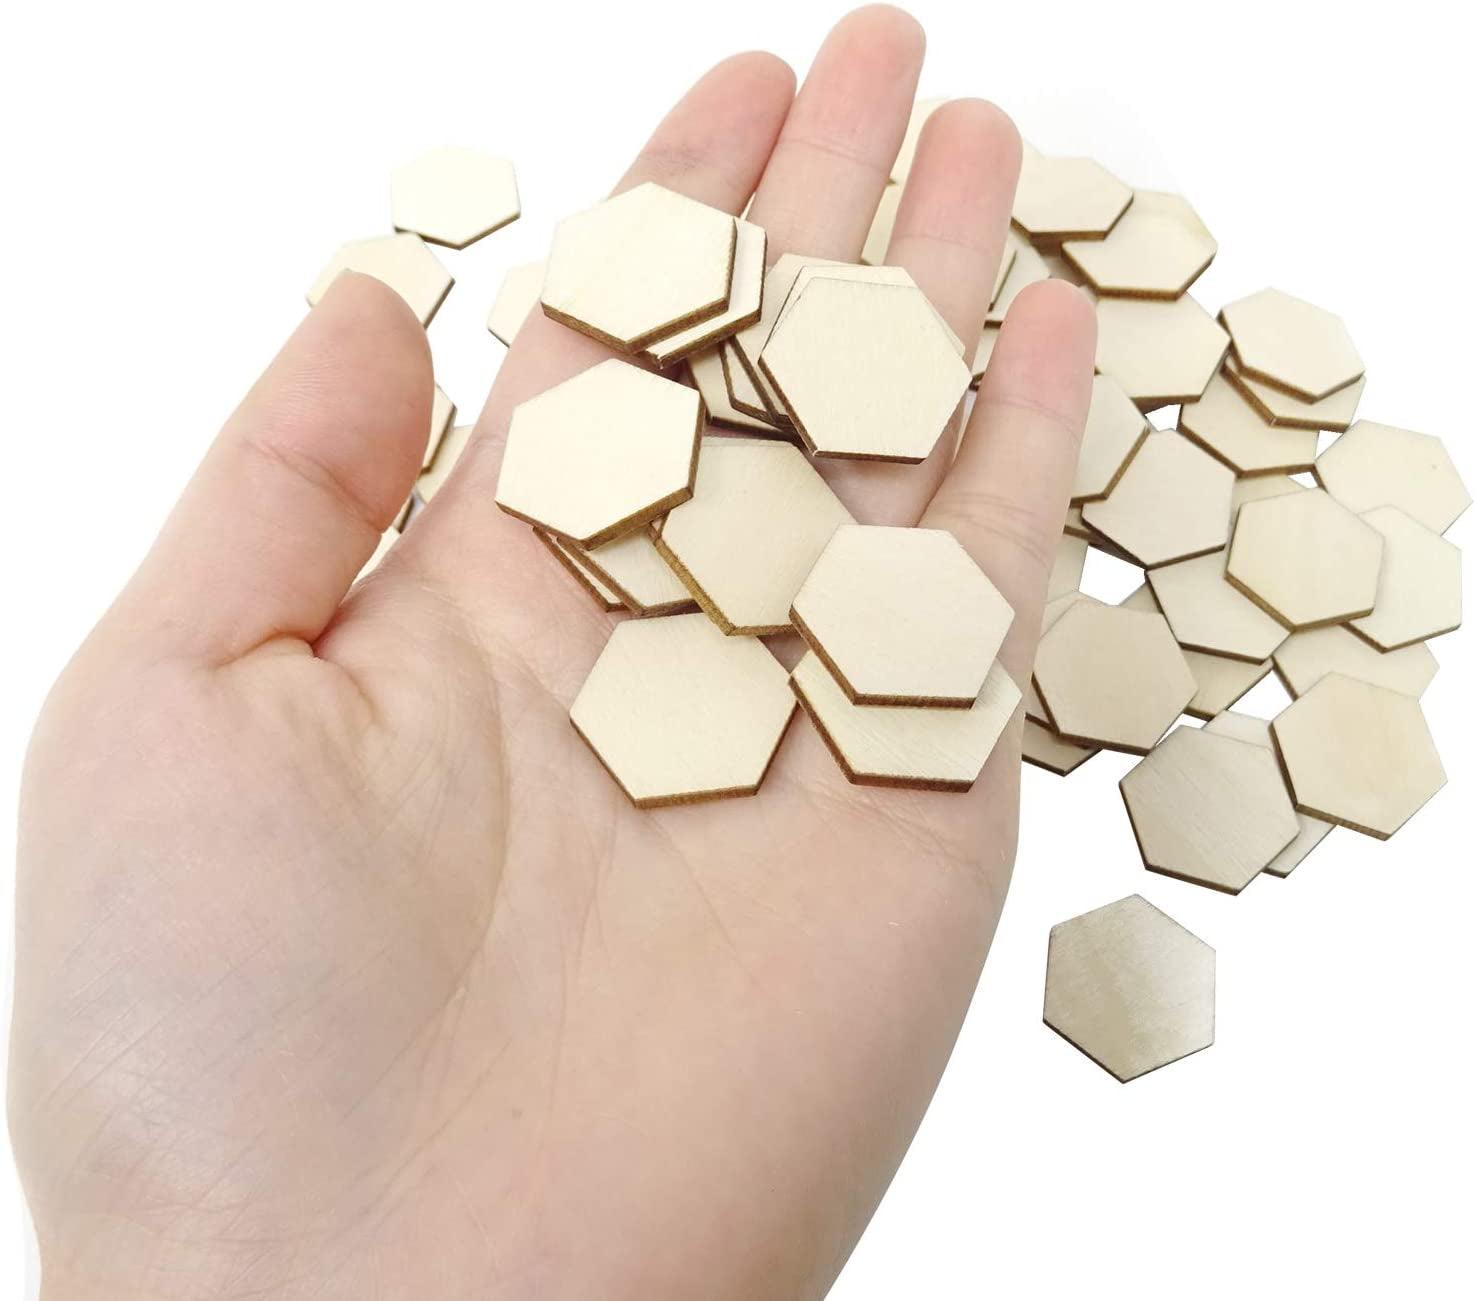 100 Pack Unfinished Wood Hexagon Pieces for DIY Crafts, 2.5mm Wood Slice  Cutouts (2x2 Inches) 